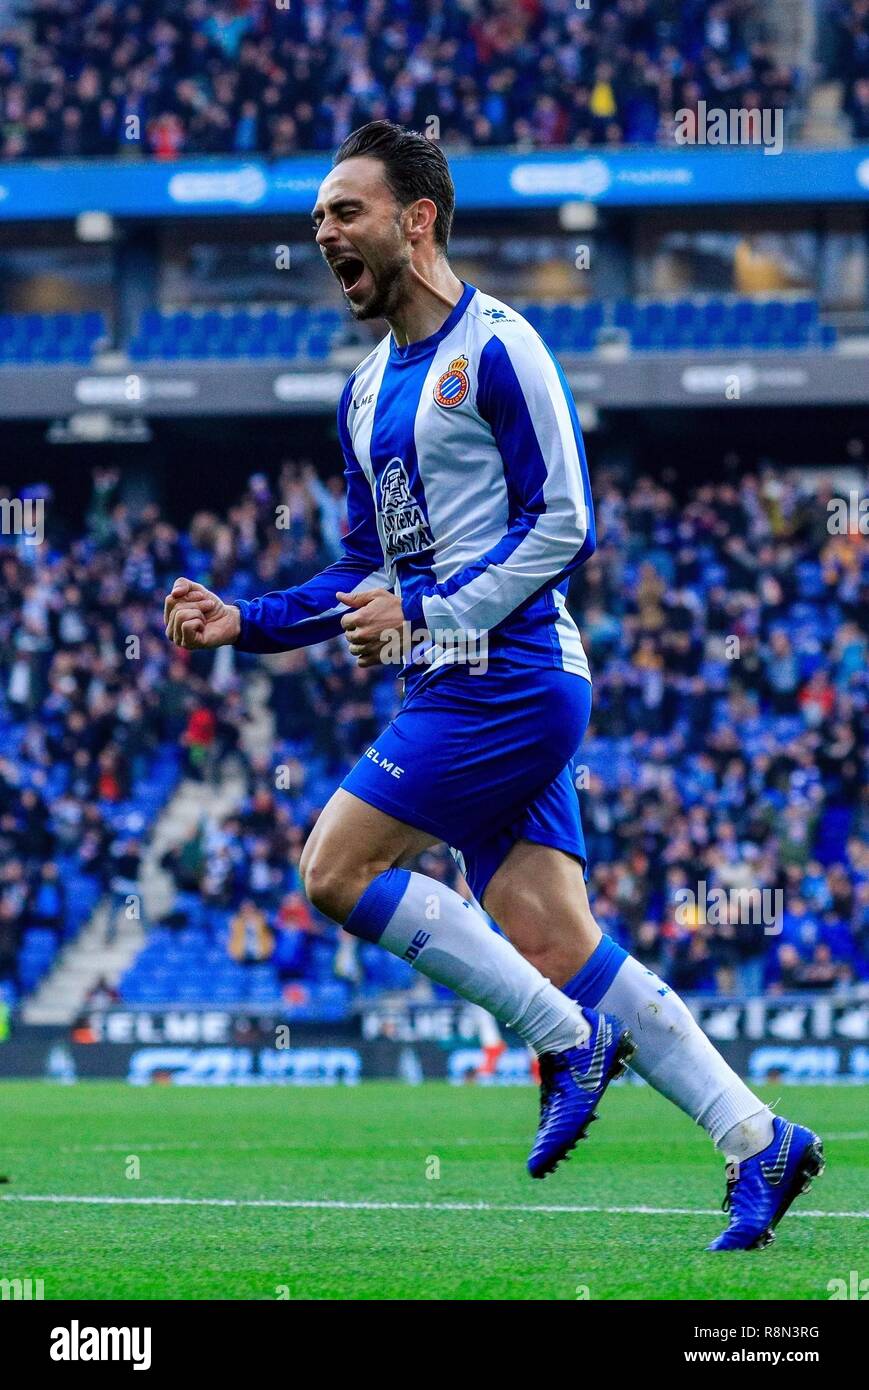 Barcelona, Spain. 16th Dec, 2018. RCD Espanyol's Sergio Garcia celebrates his score during a Spanish league match between RCD Espanyol and Real Betis in Barcelona, Spain, on Dec. 16, 2018. Real Betis won 3-1. Credit: Joan Gosa/Xinhua/Alamy Live News Stock Photo